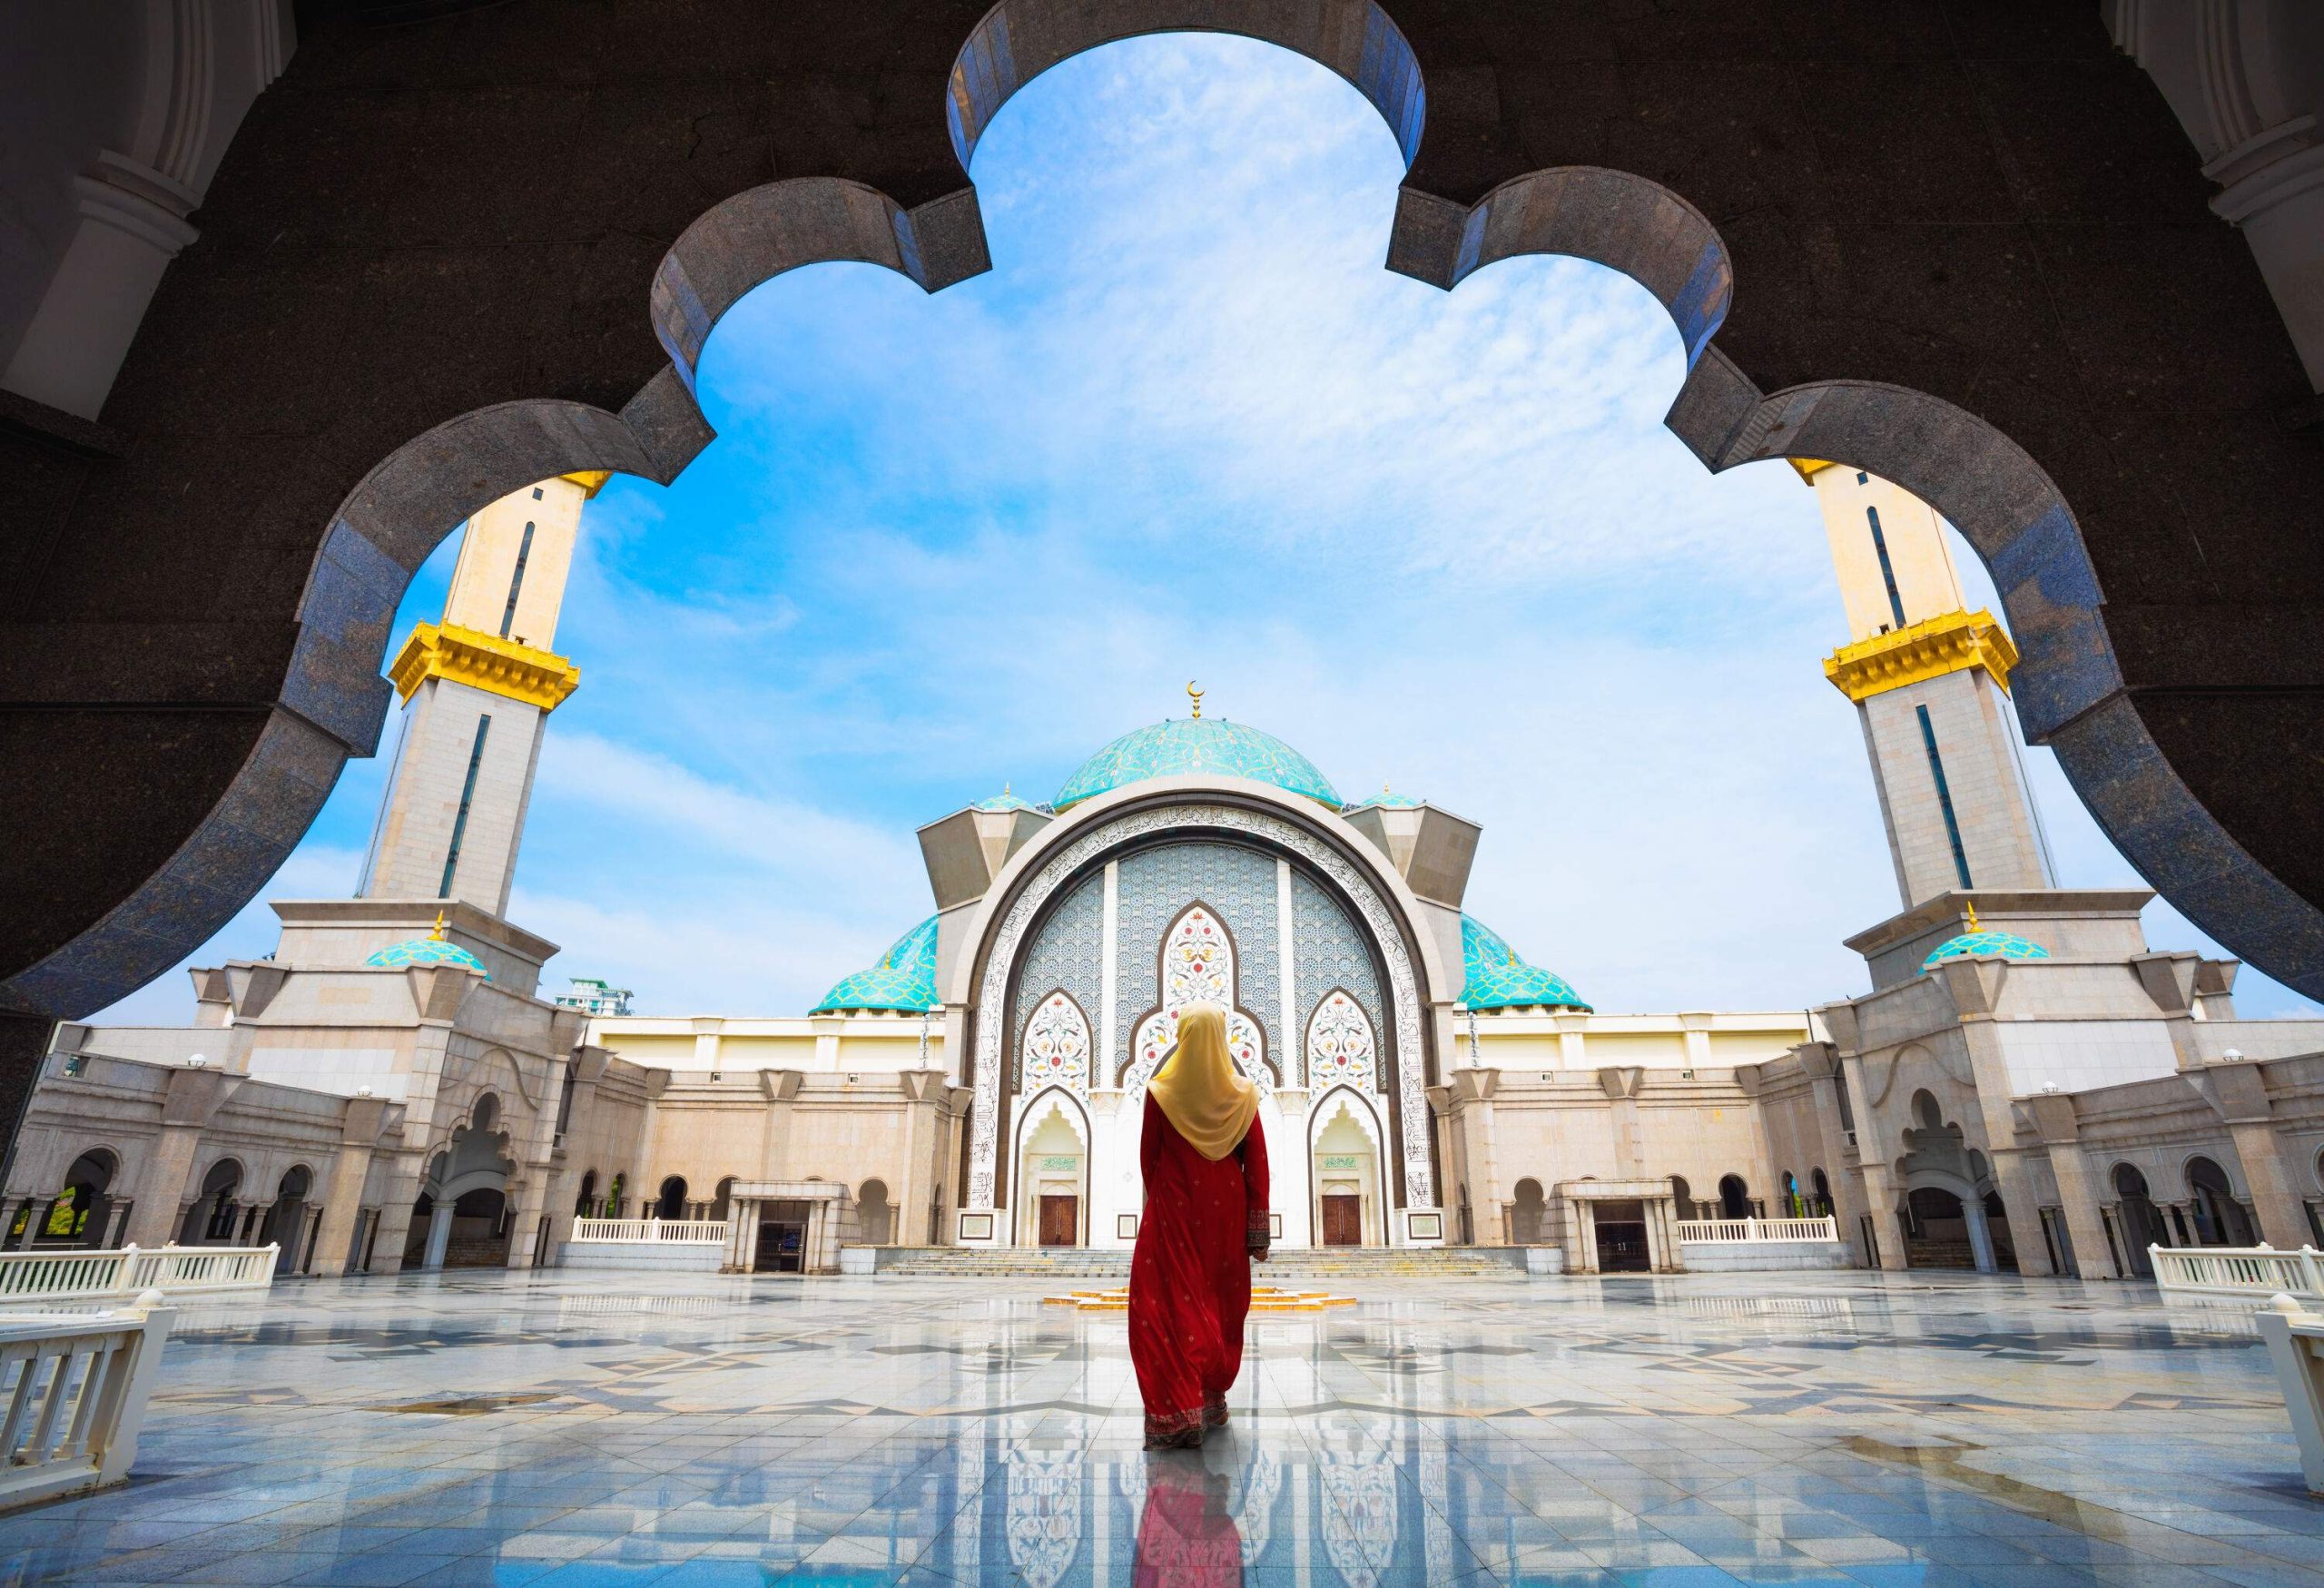 A rear view of a woman in a long red dress with a yellow headscarf walks on the glass-like courtyard of a lovely mosque.